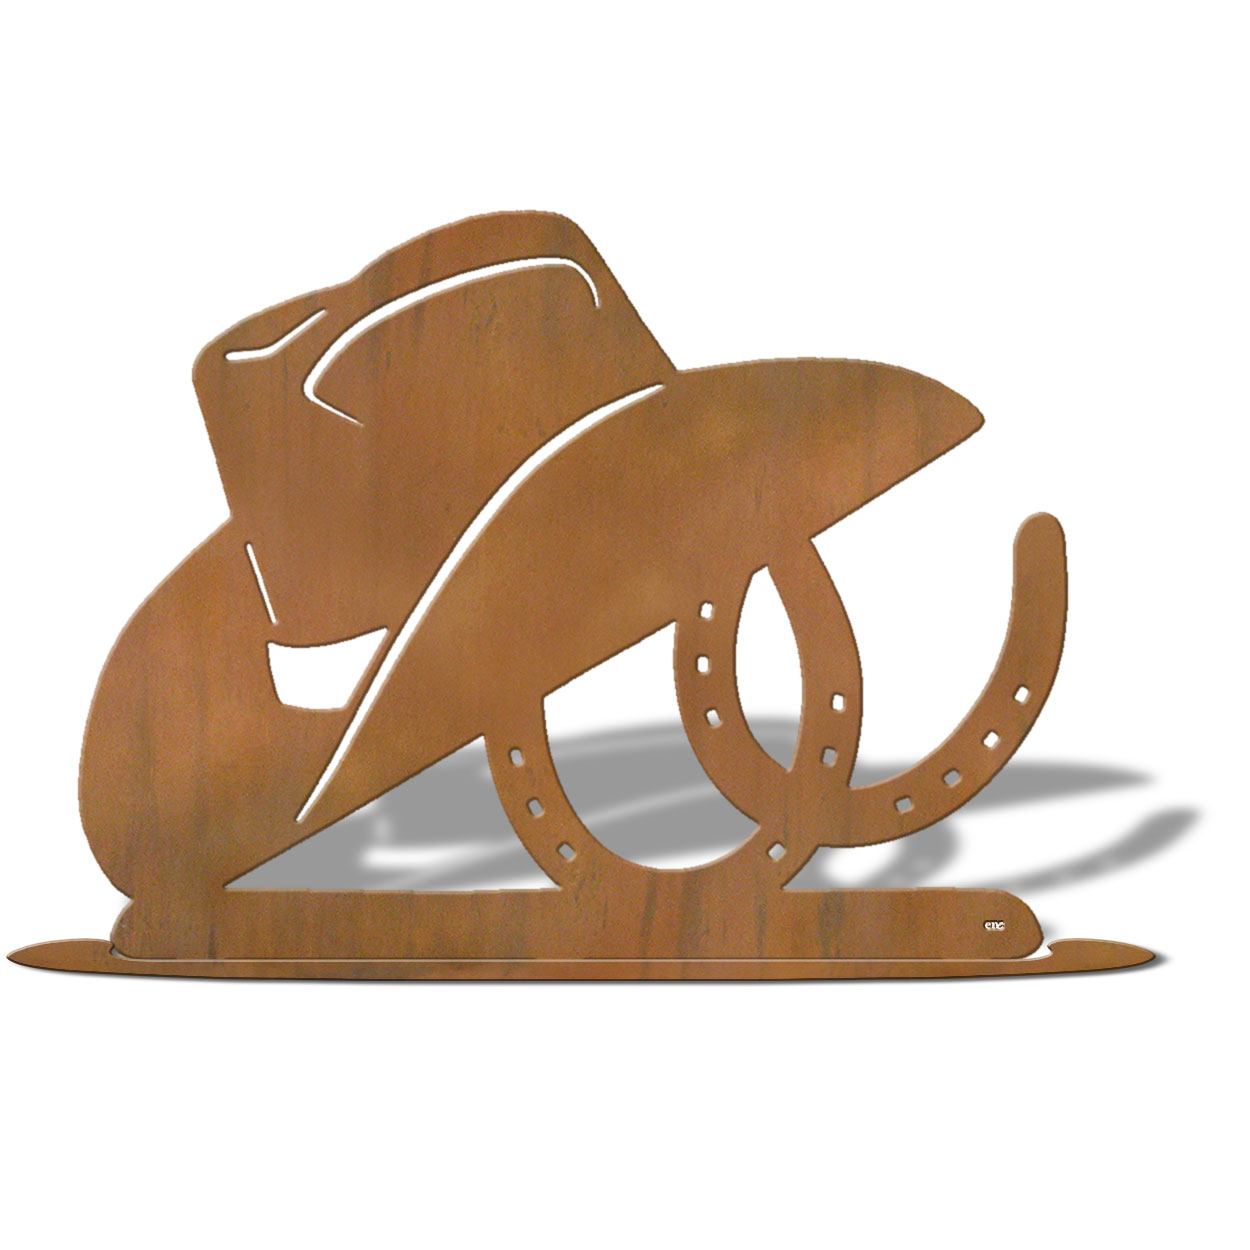 623016r - Tabletop Art - 24in x 16in - Hat Horseshoes - Rust Patina